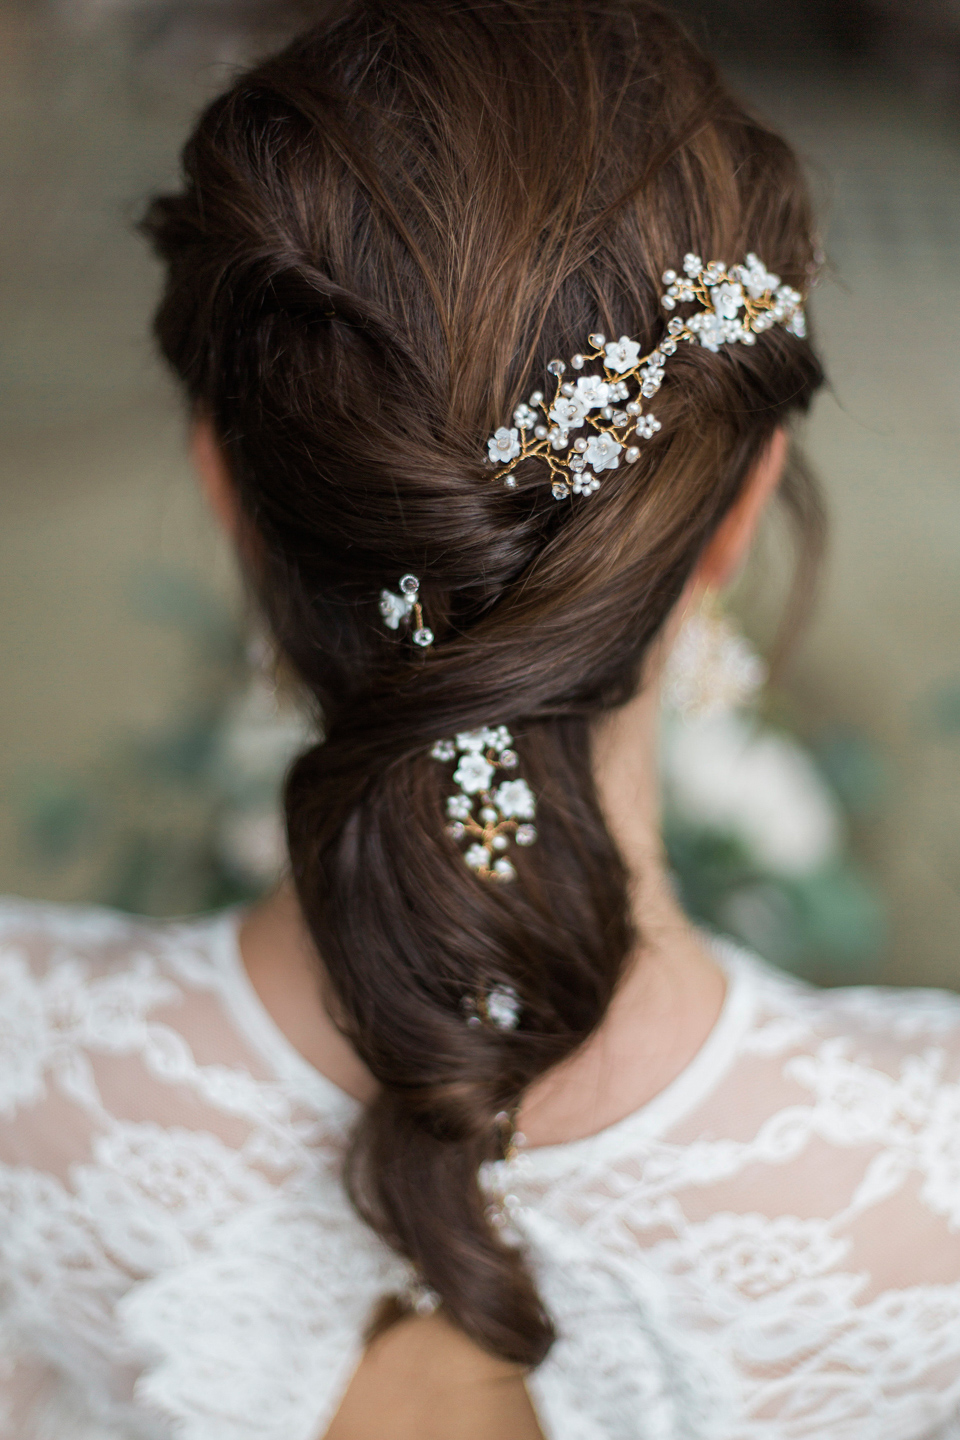 Hermione Harbut, dreamy, ethereal and delicate headpieces for brides. Visit hermioneharbutt.com.